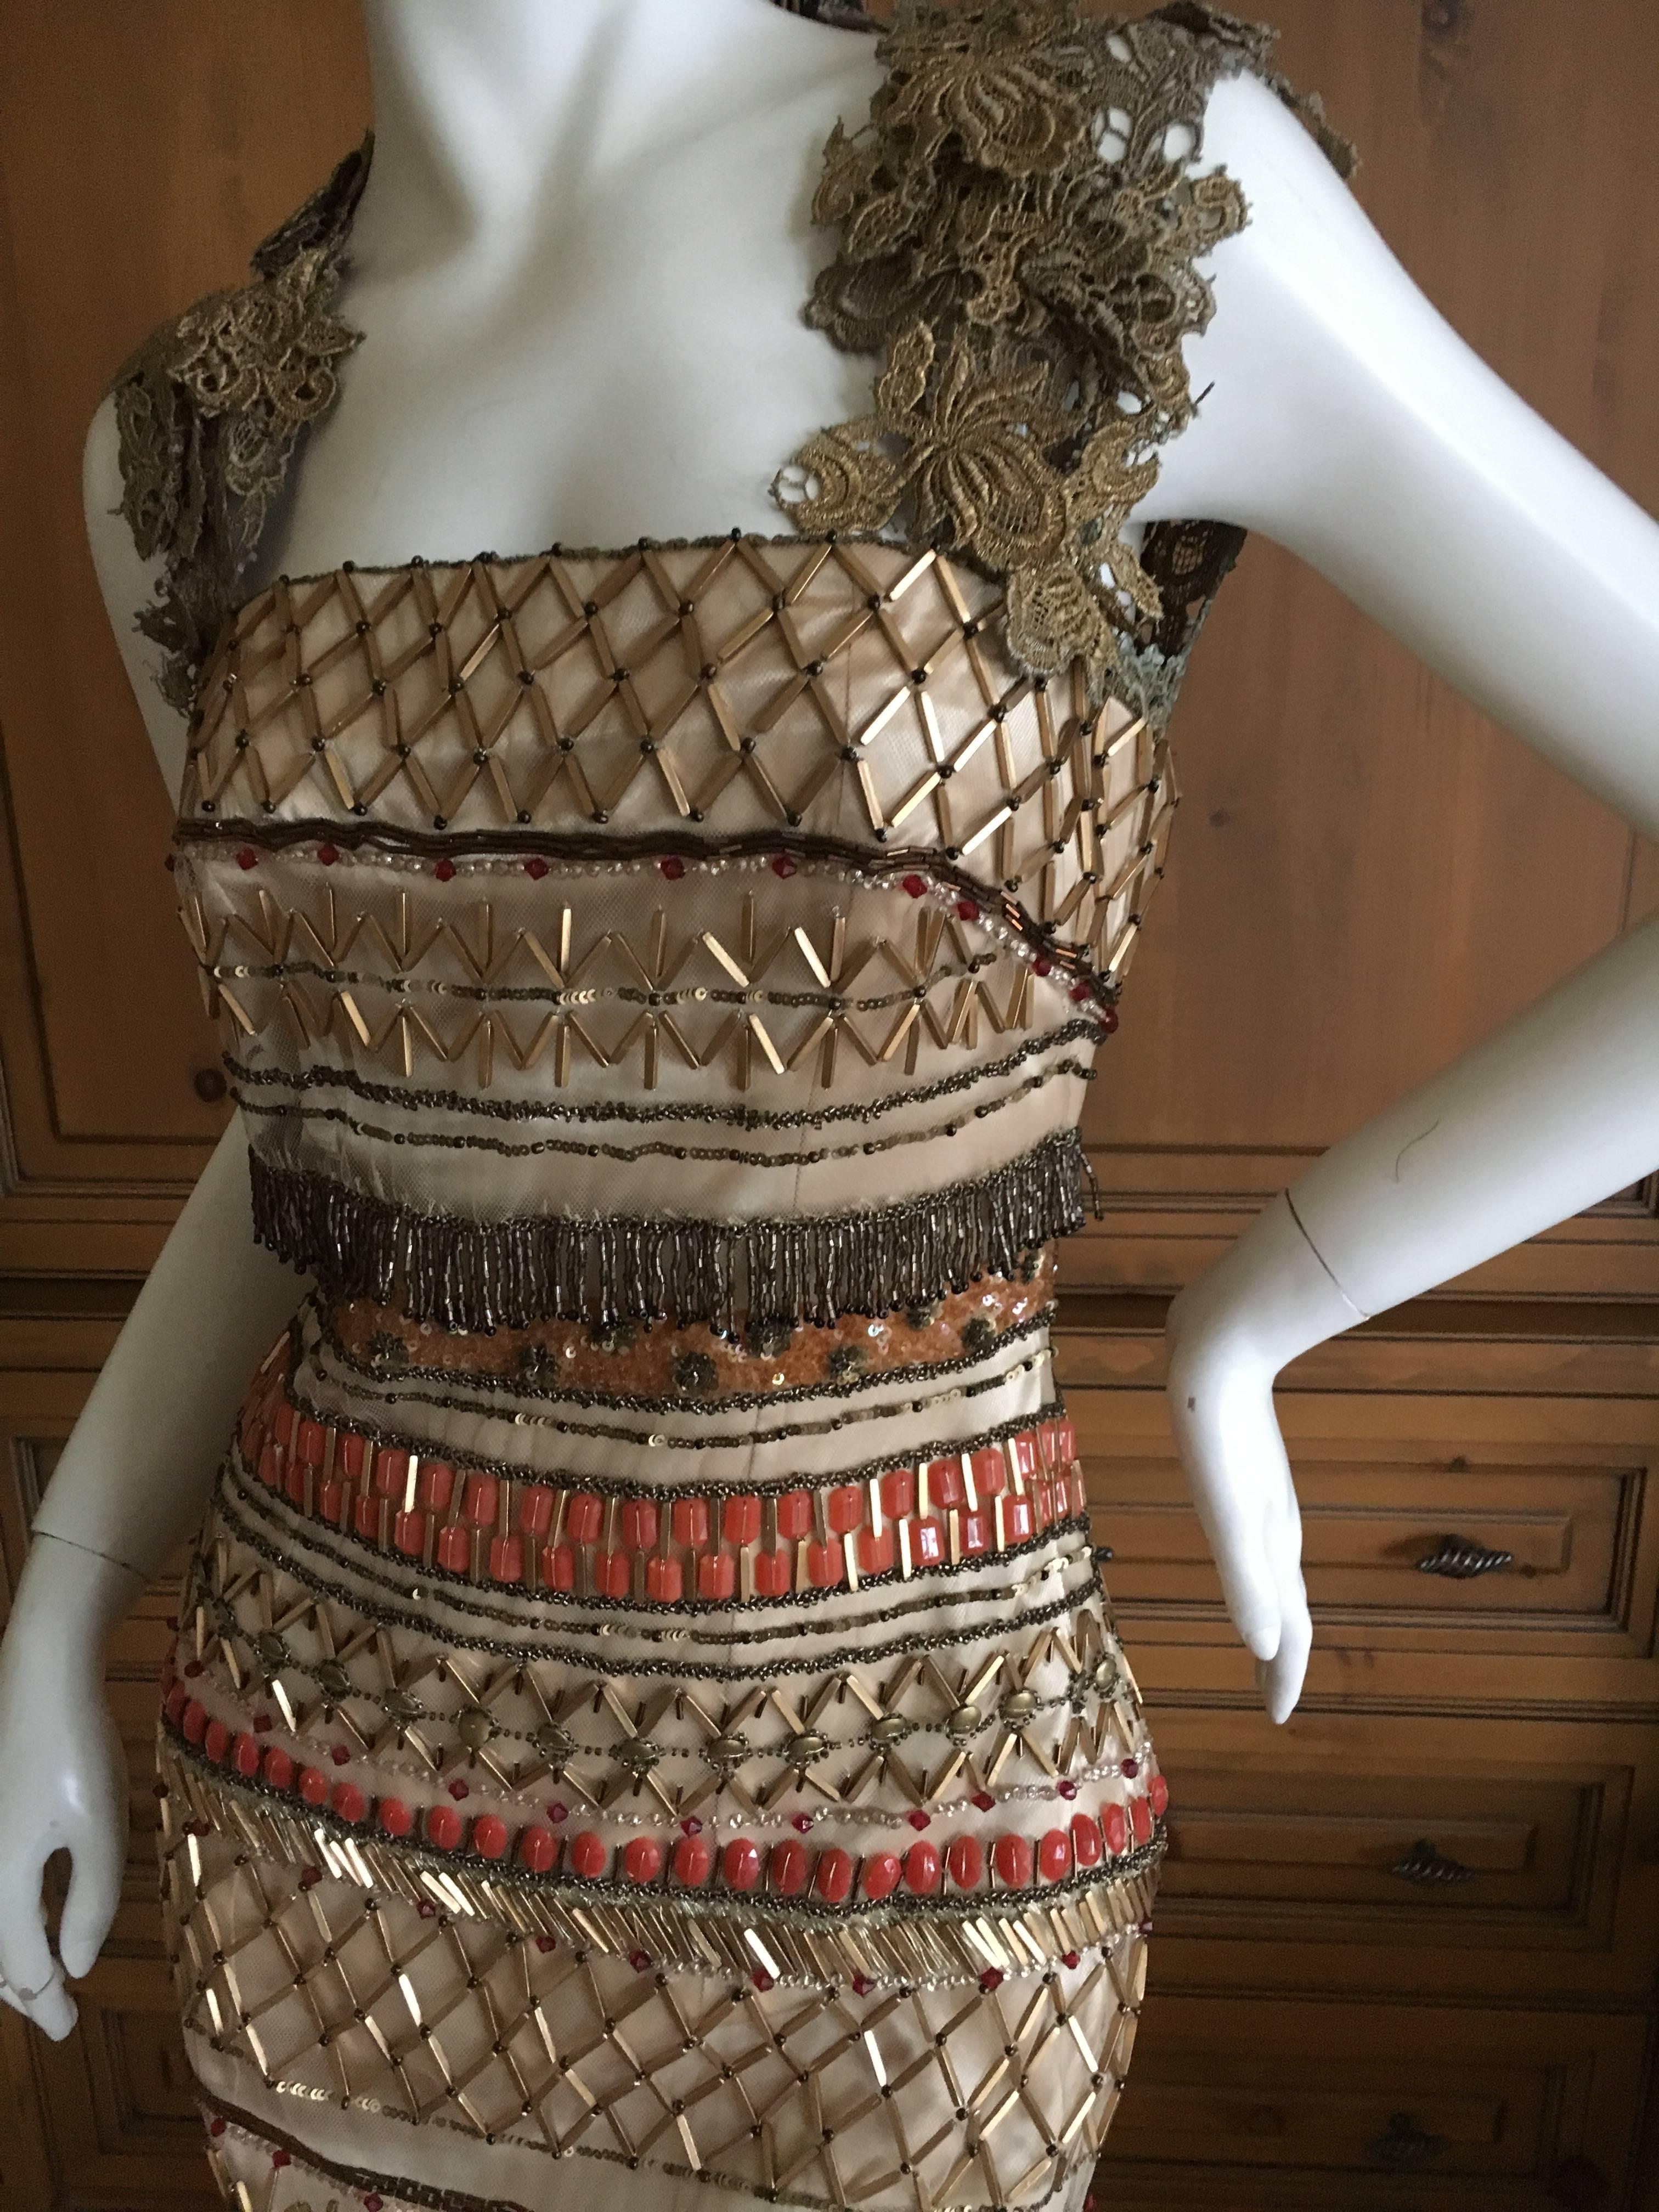 Valentino Vintage Beautifully Embellished Cocktail Dress.
The details on this are incredible , Guipure lace,  gold and coral beads on netting over silk. 
Exquisite.
Size 36
Bust 36